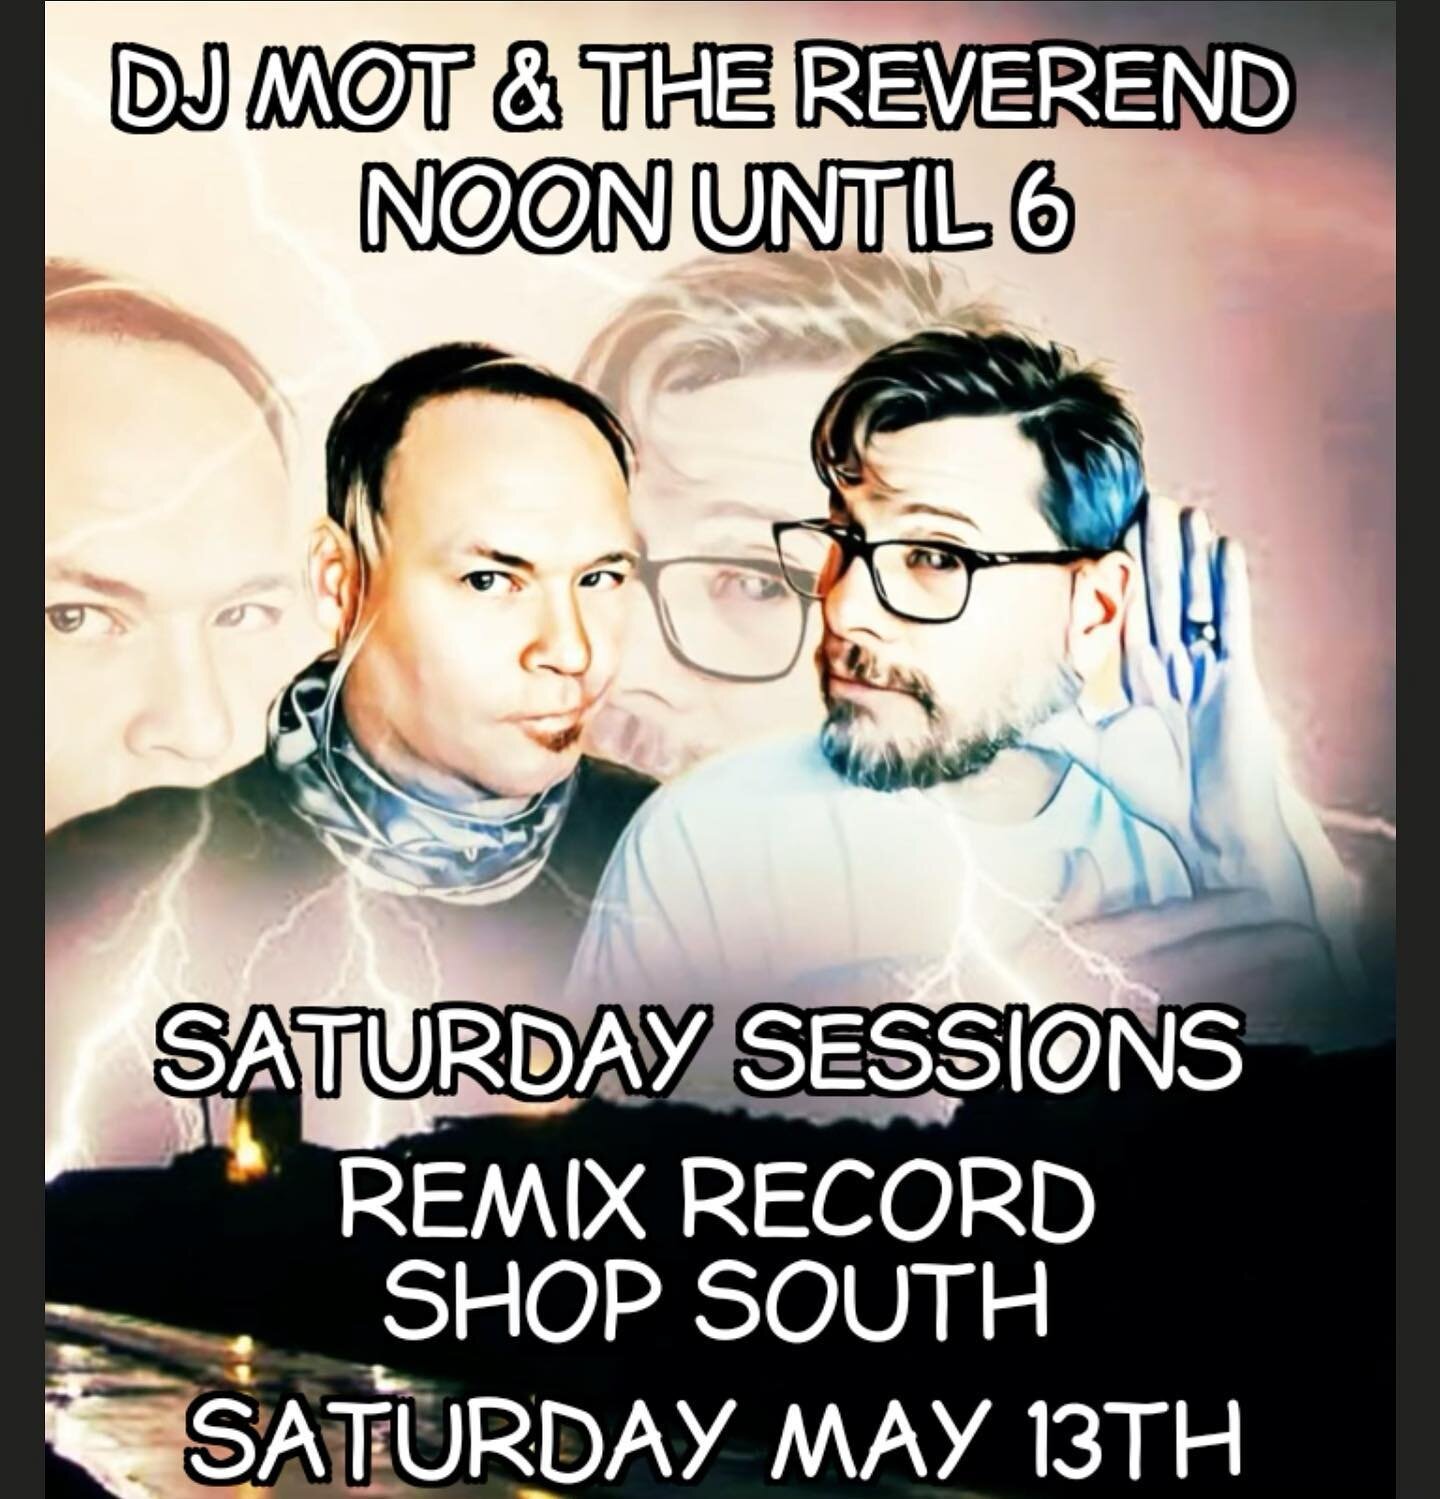 Join us this Saturday 5.13 for Saturday Sessions with @djtommymot and @jerryj3434 ! 12pm-6pm 
Drinks available! 🍻🍷